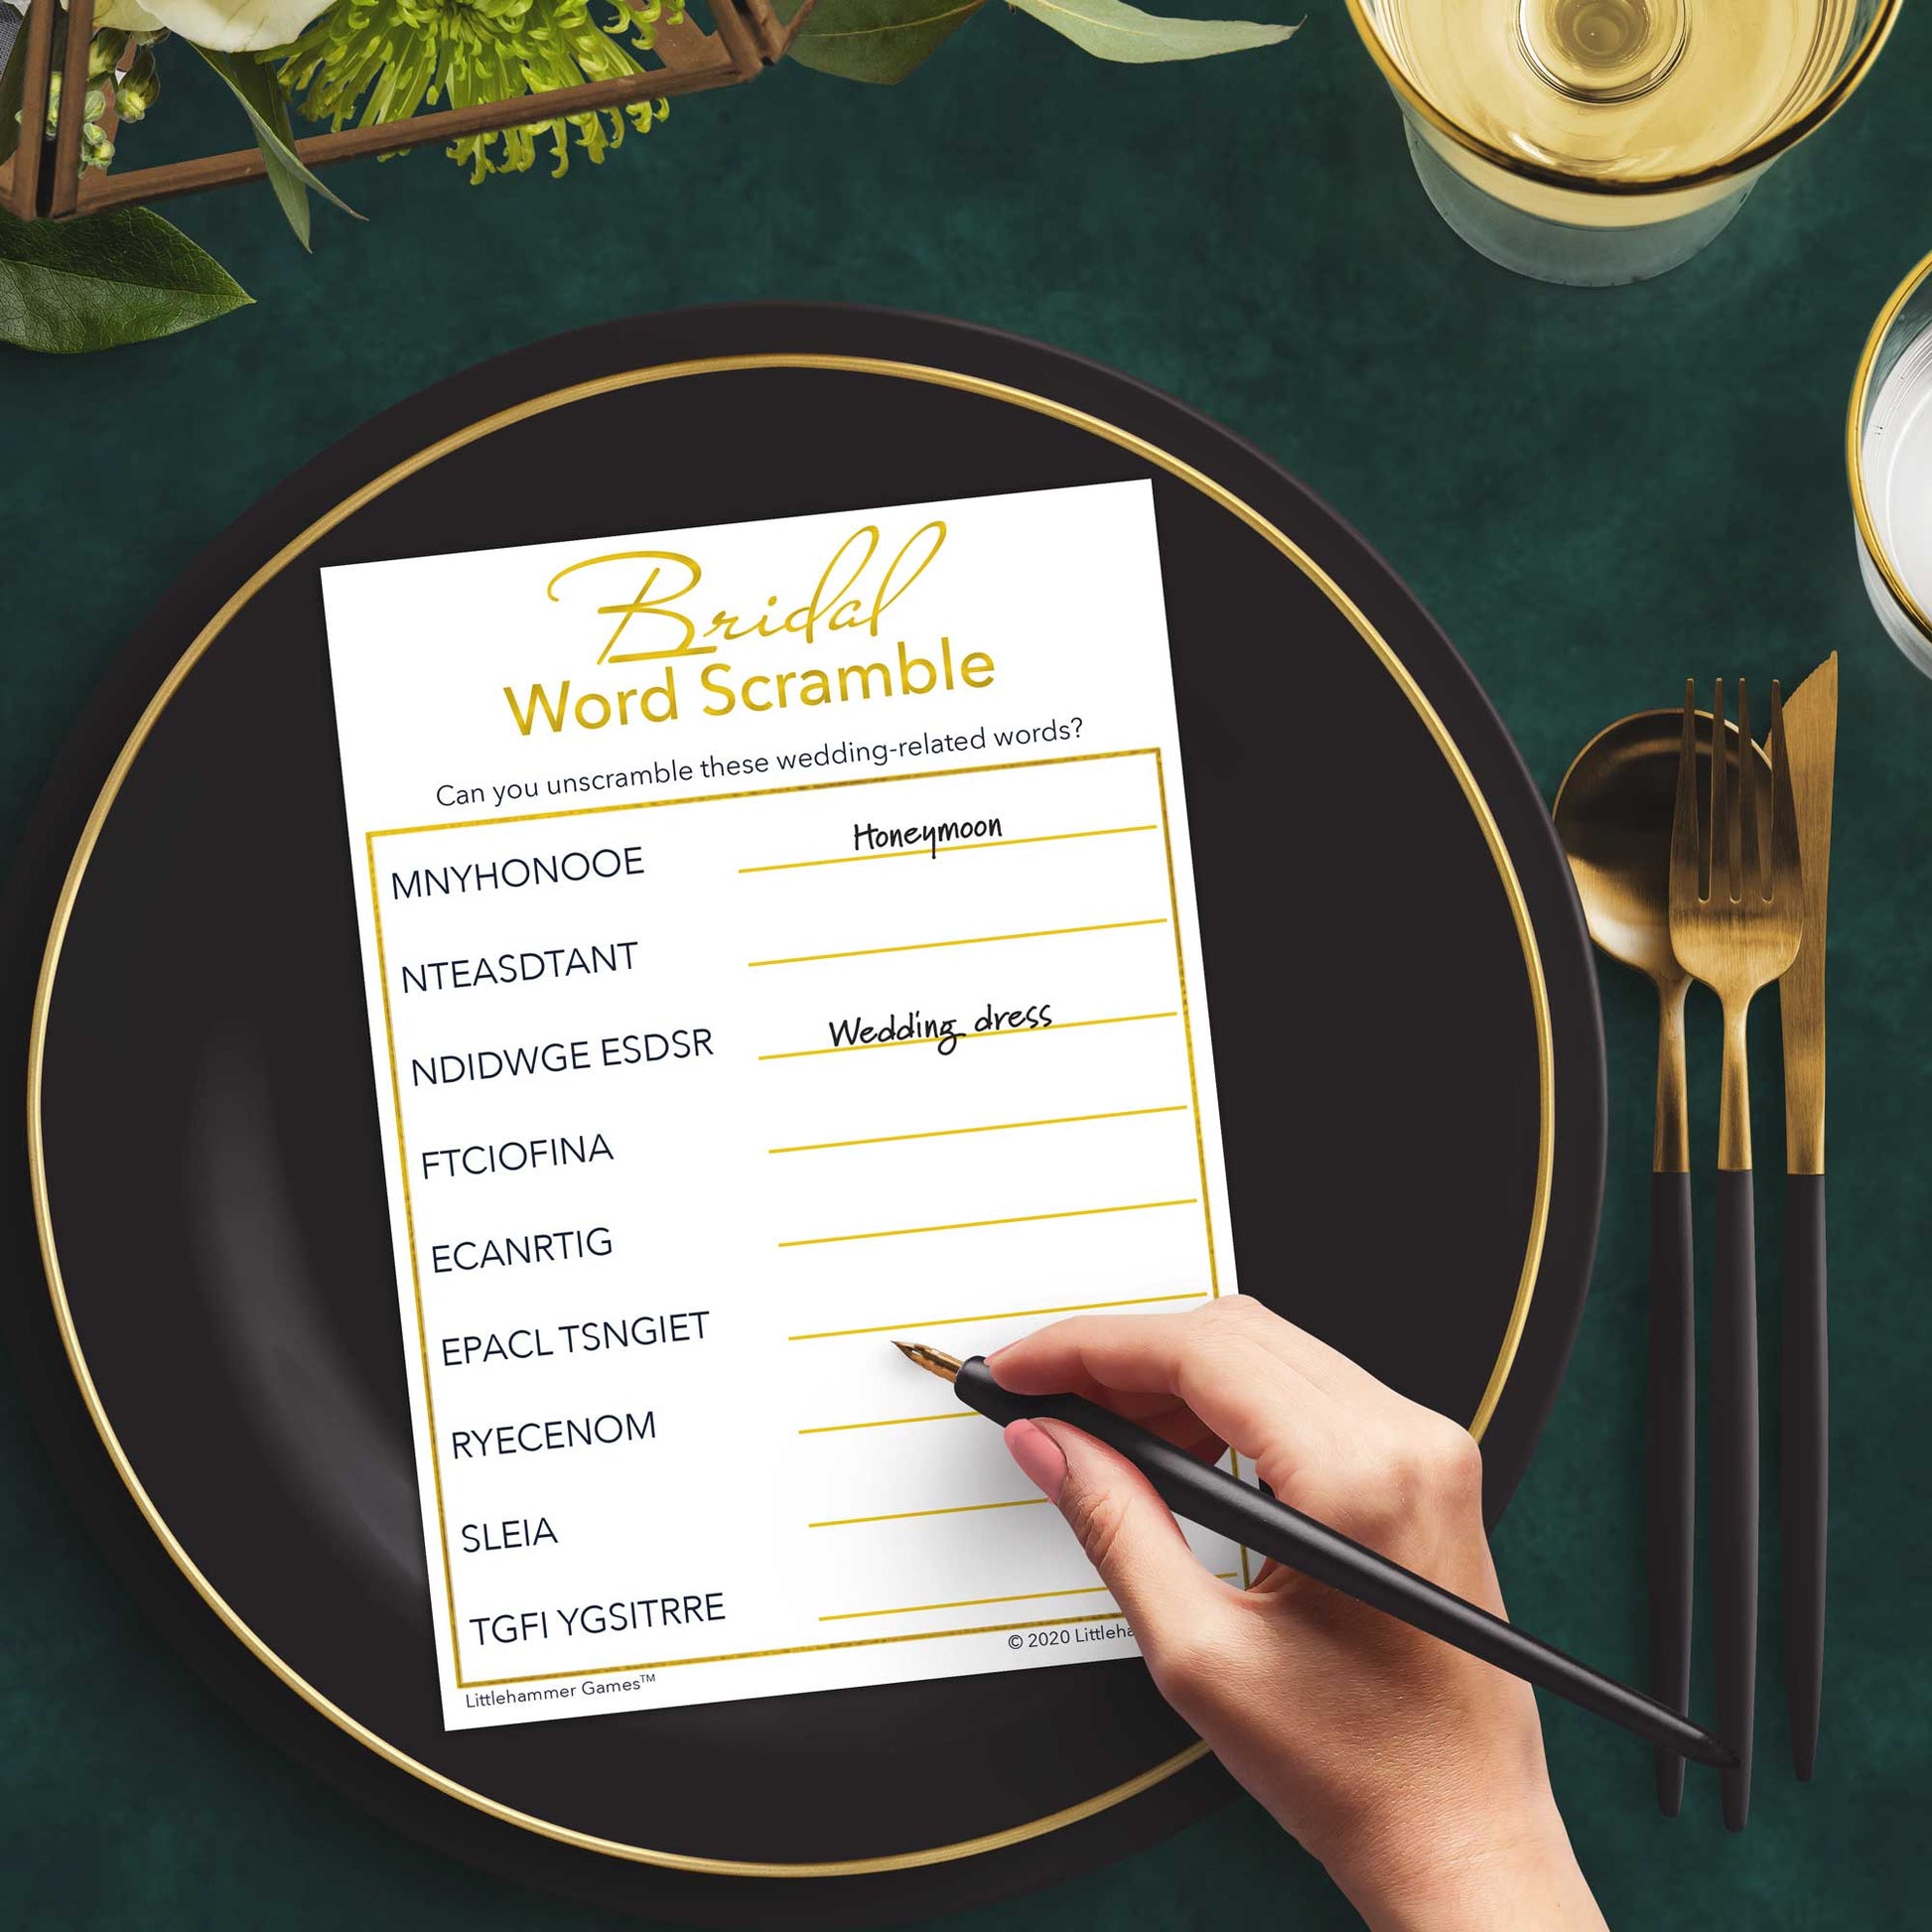 Woman with a pen playing a gold and white Bridal Word Scramble game card at a dark place setting